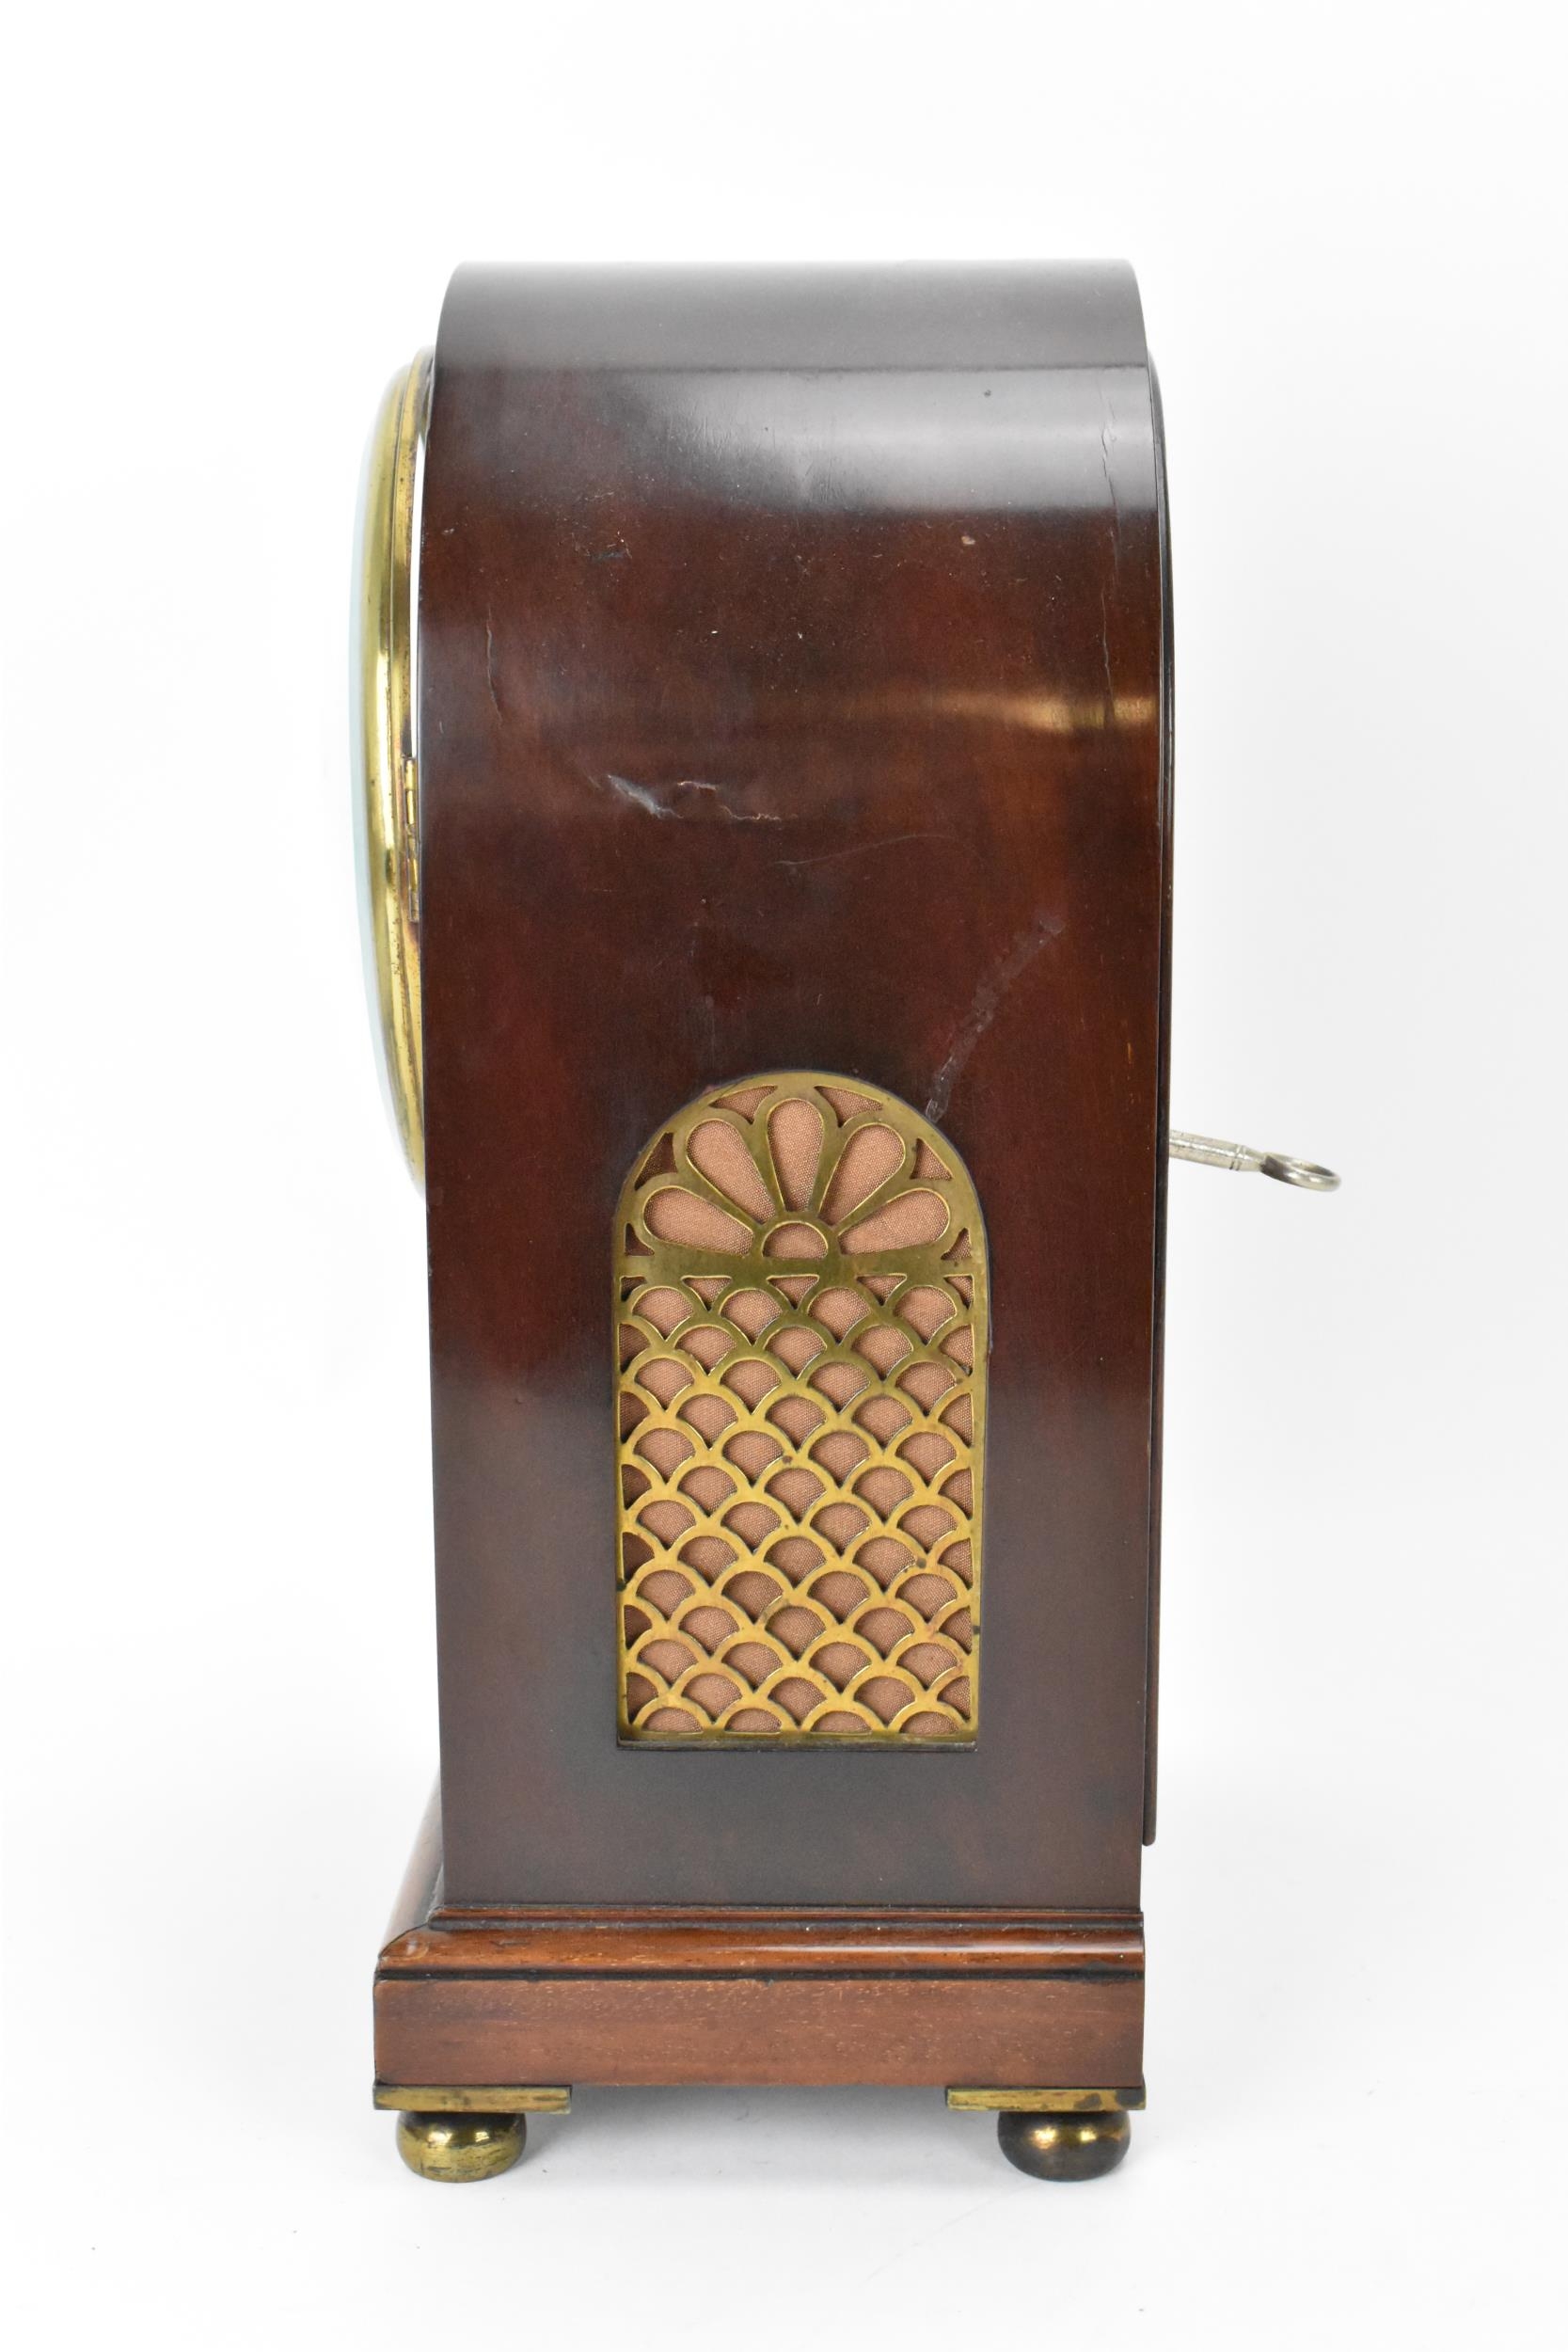 A 19th century mahogany bracket clock, the case having an arched top with gilt pierced side - Image 5 of 8